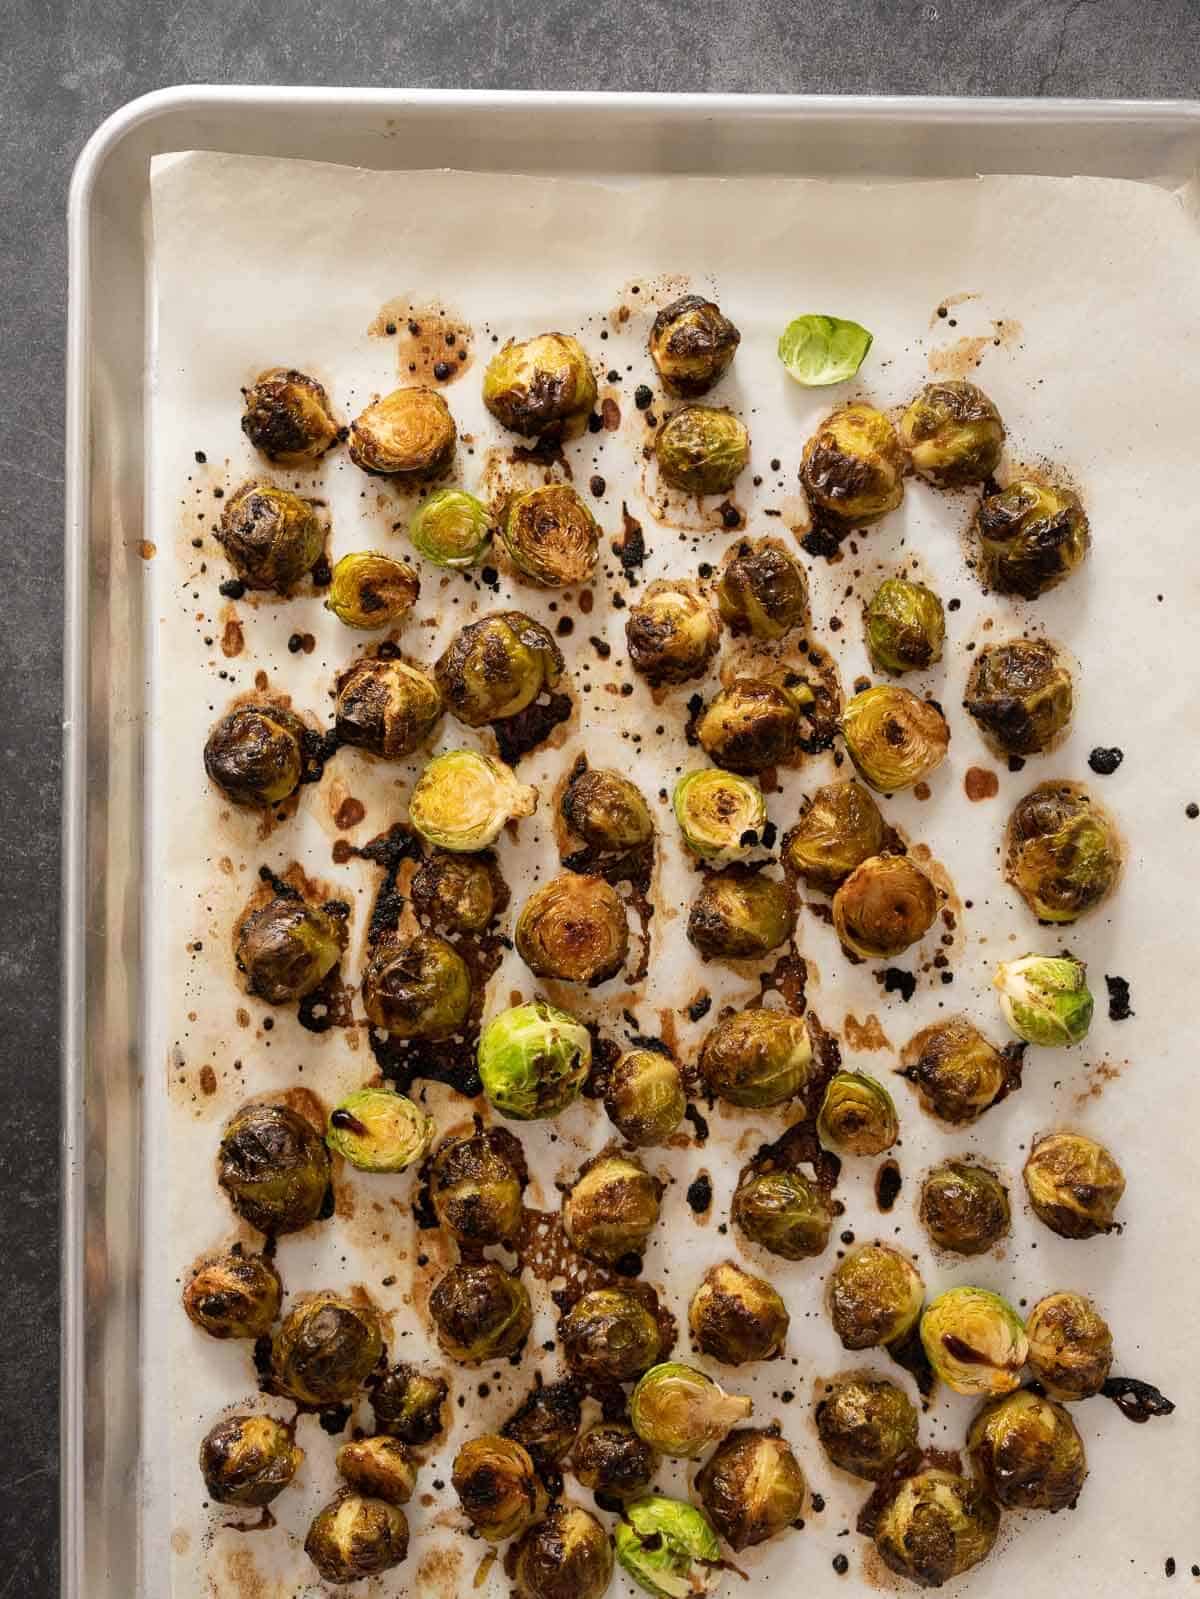 turn the Brussels sprouts halfway.